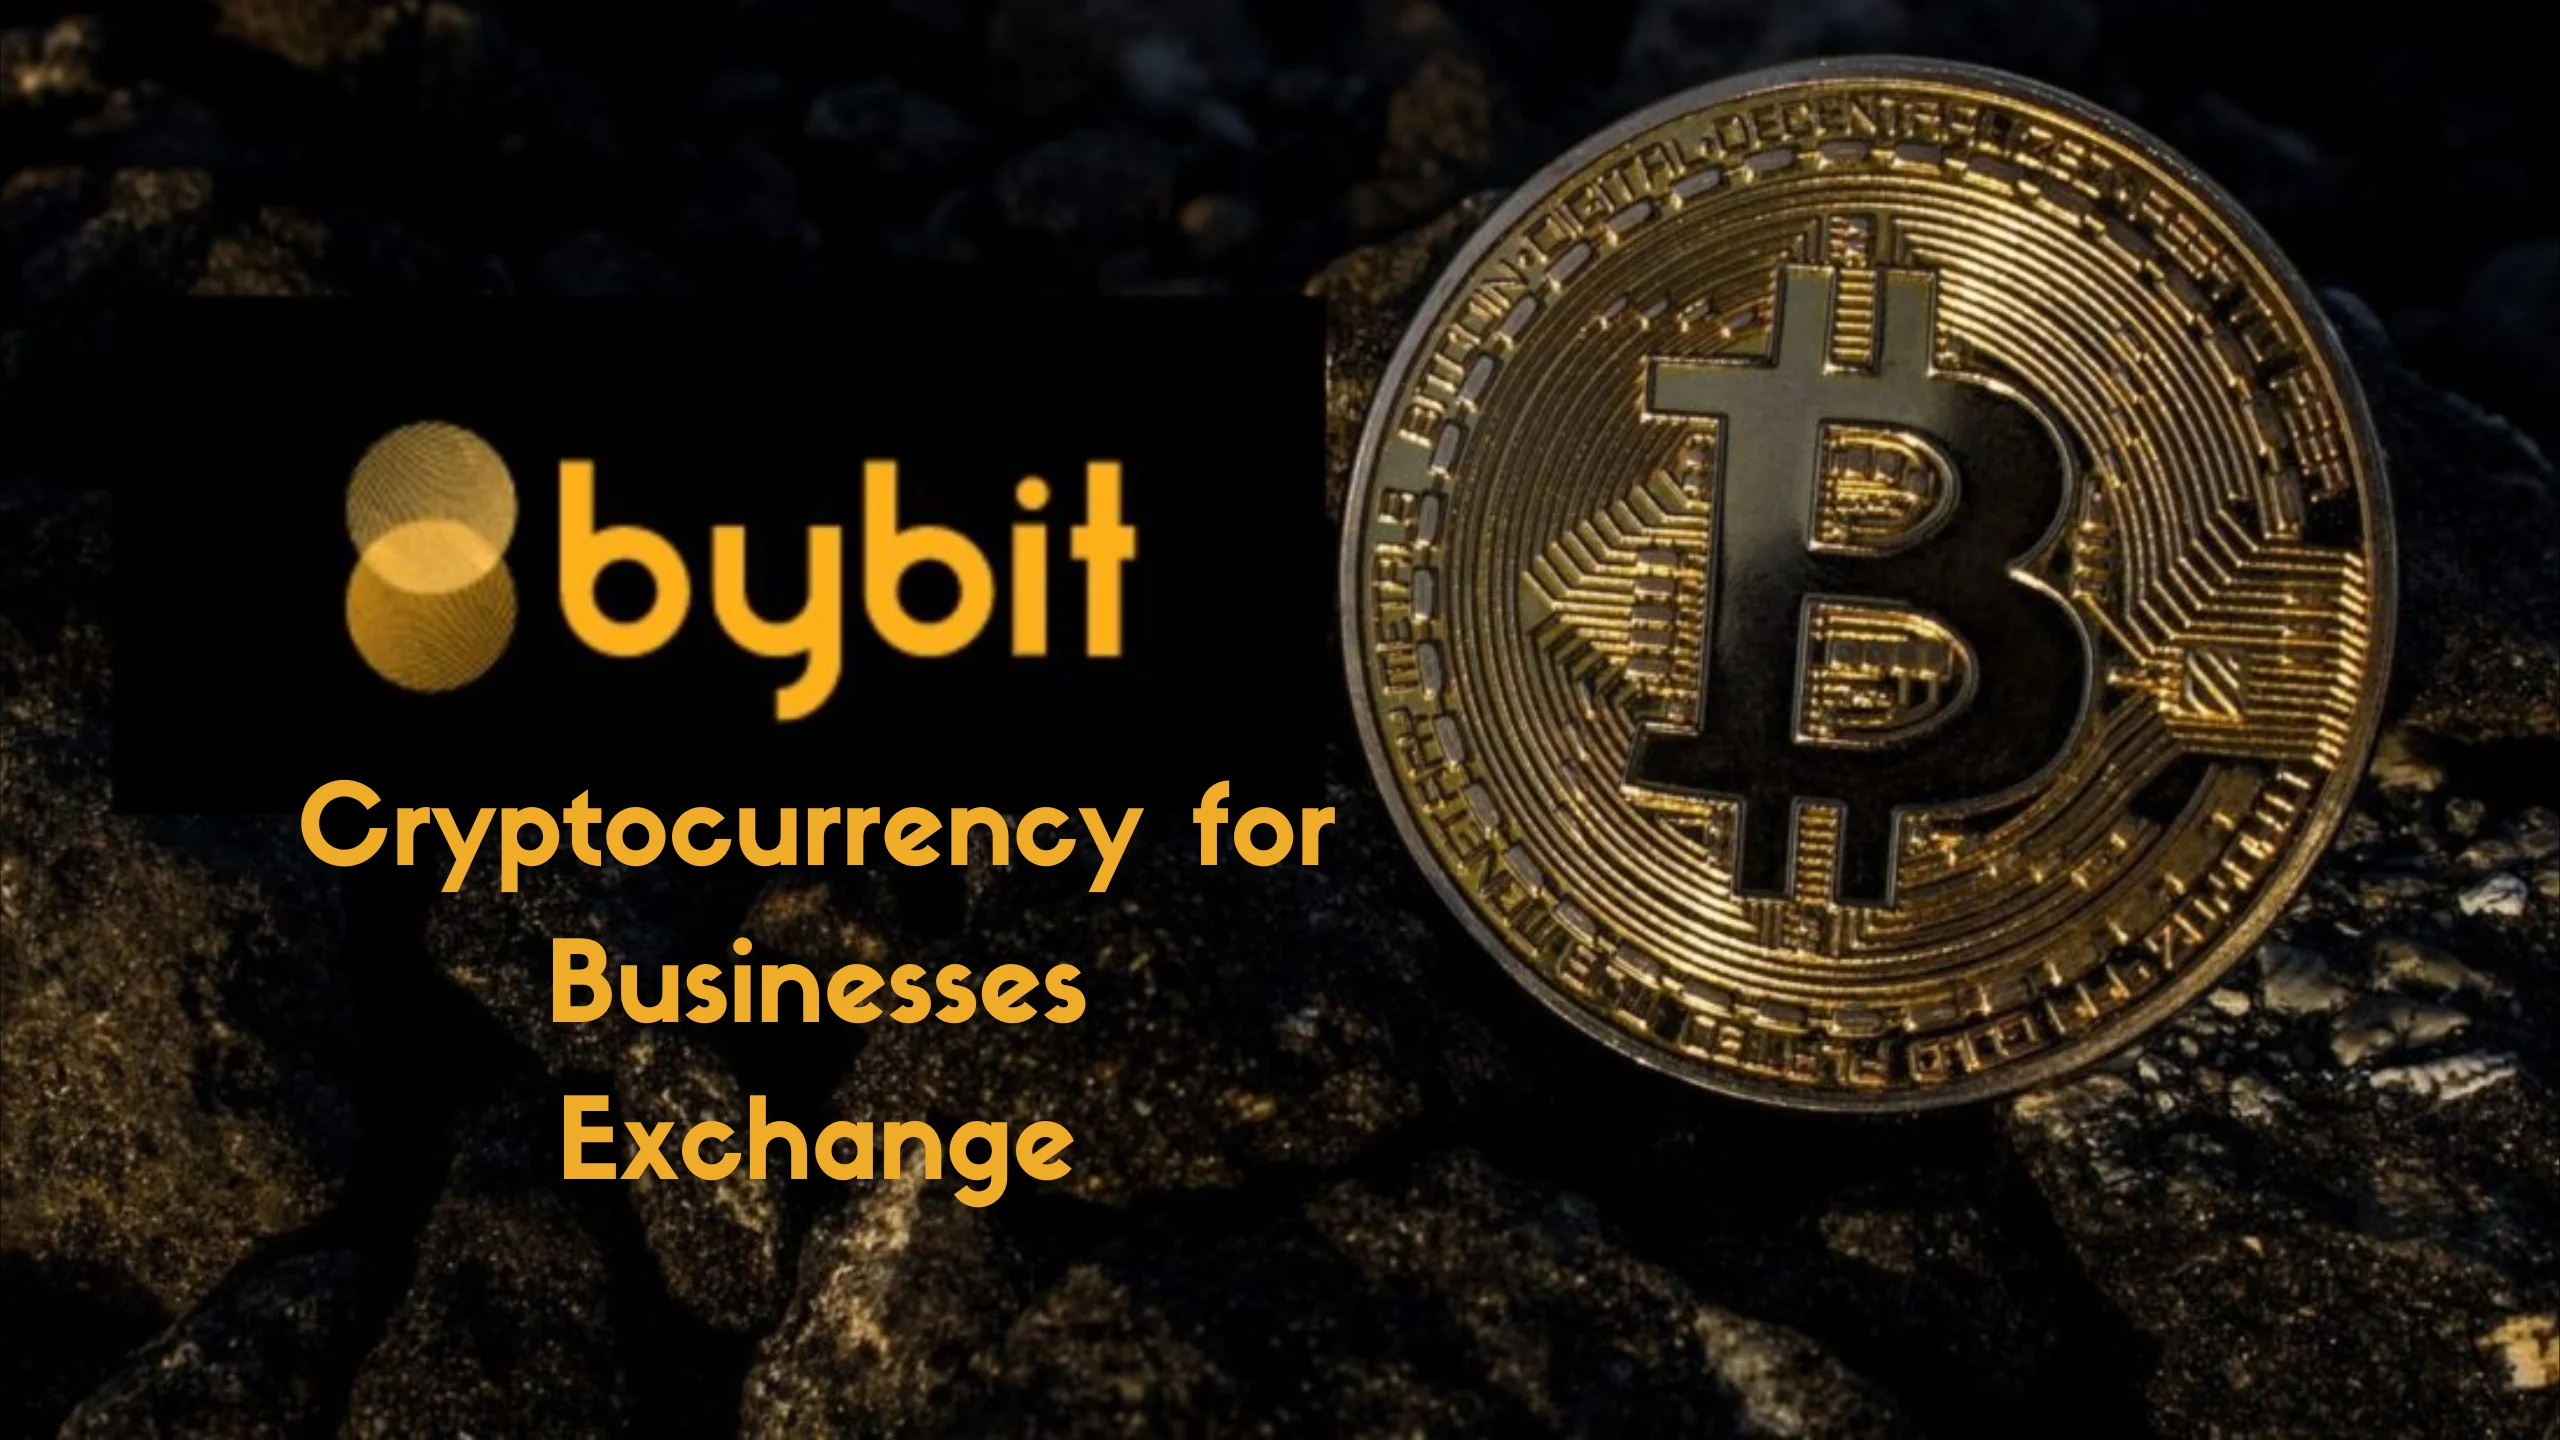 Key benefits of Bybit cryptocurrency exchange for businesses, including high liquidity and advanced trading tools.